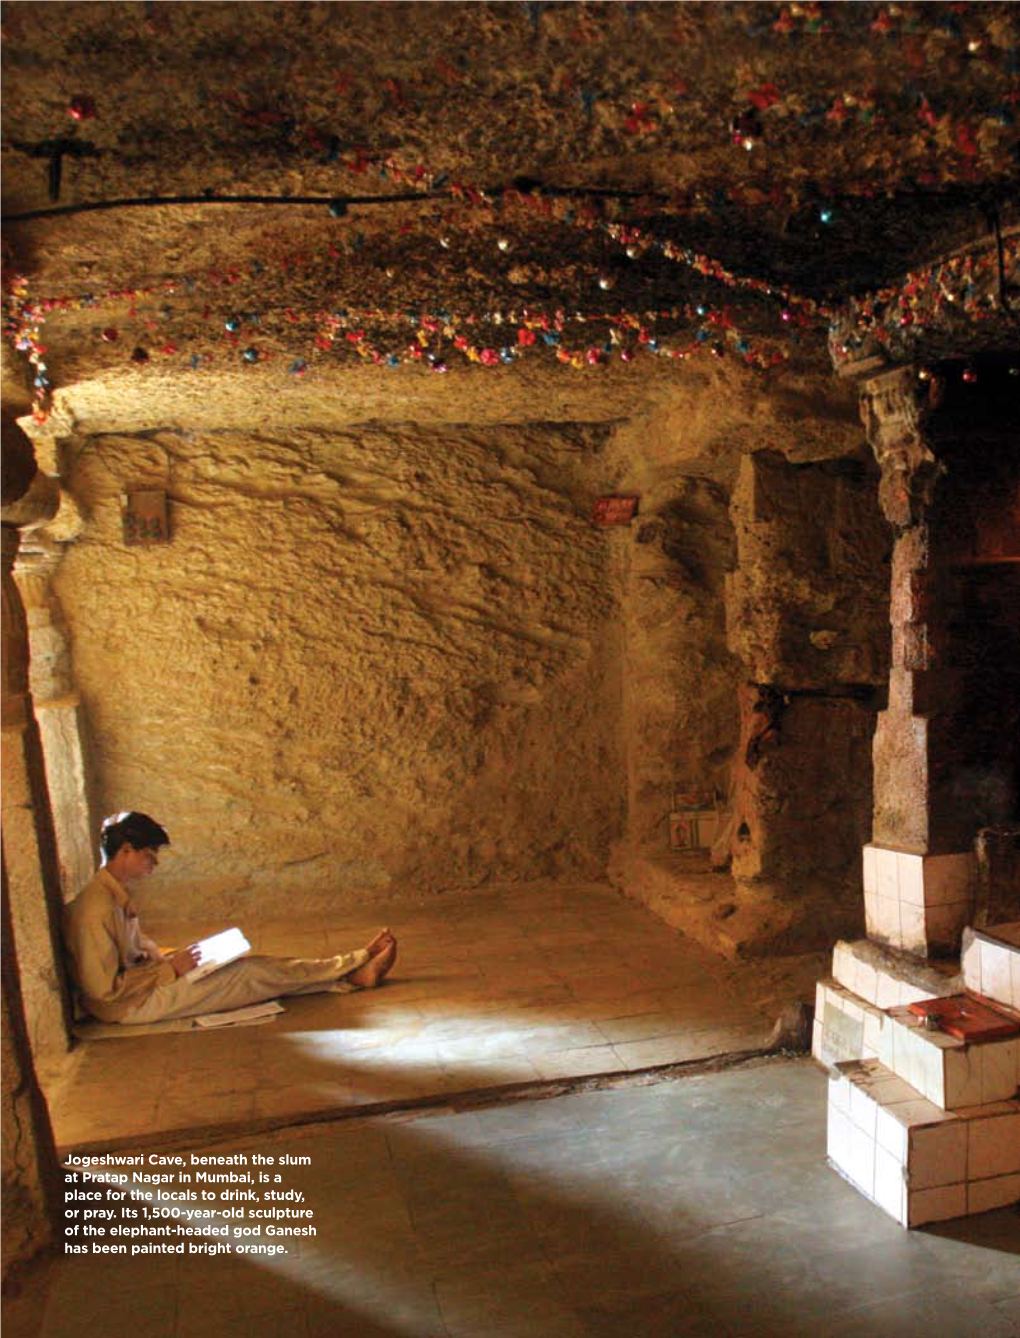 Jogeshwari Cave, Beneath the Slum at Pratap Nagar in Mumbai, Is a Place for the Locals to Drink, Study, Or Pray. Its 1500-Year